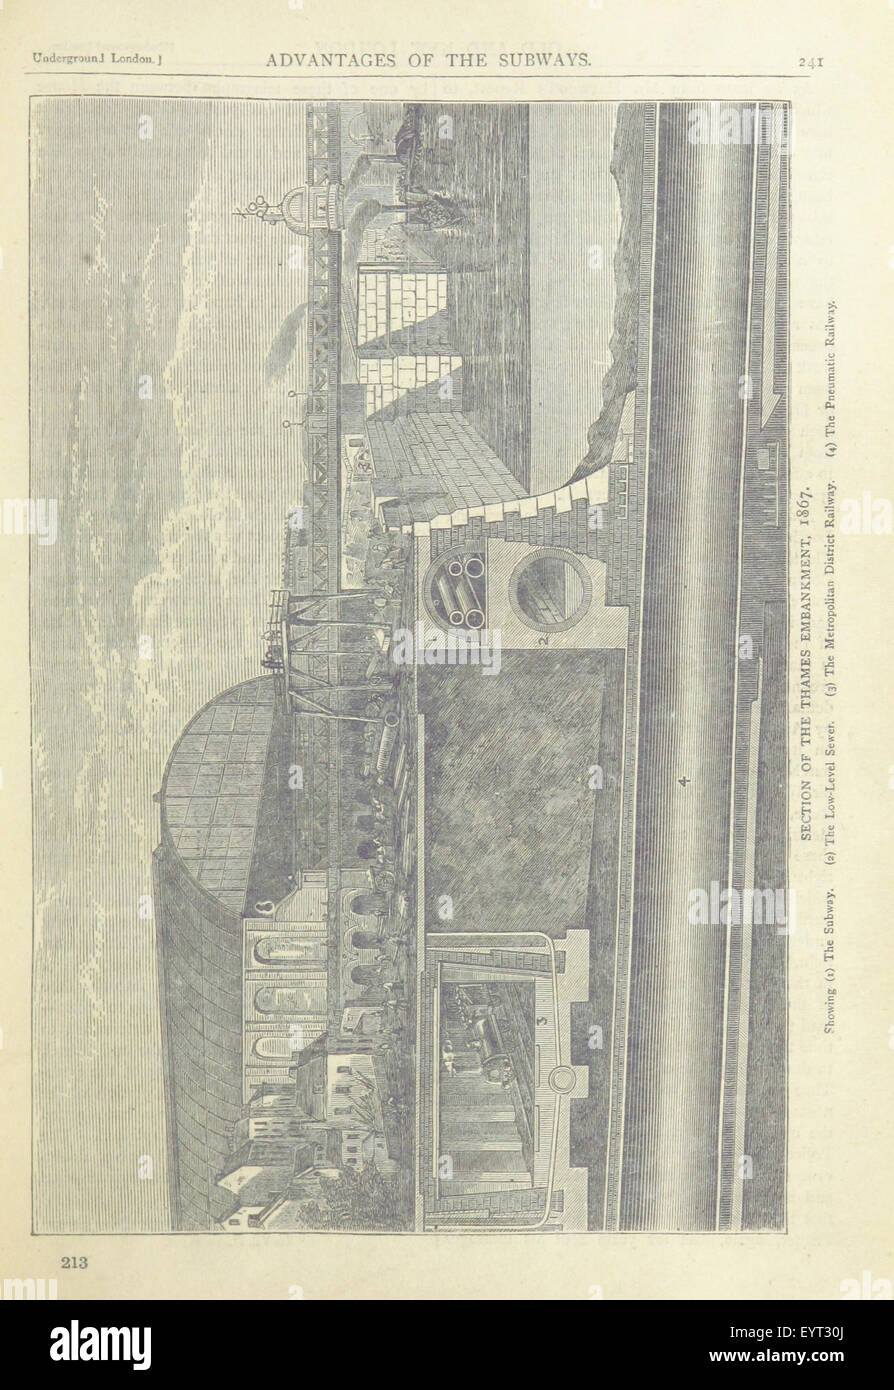 Image taken from page 261 of 'Old and New London; illustrated. A narrative of its history, its people, and its places. [vol. 1, 2,] by Walter Thornbury (vol. 3-6, by E. Walford)' Image taken from page 261 of 'Old and New London; Stock Photo